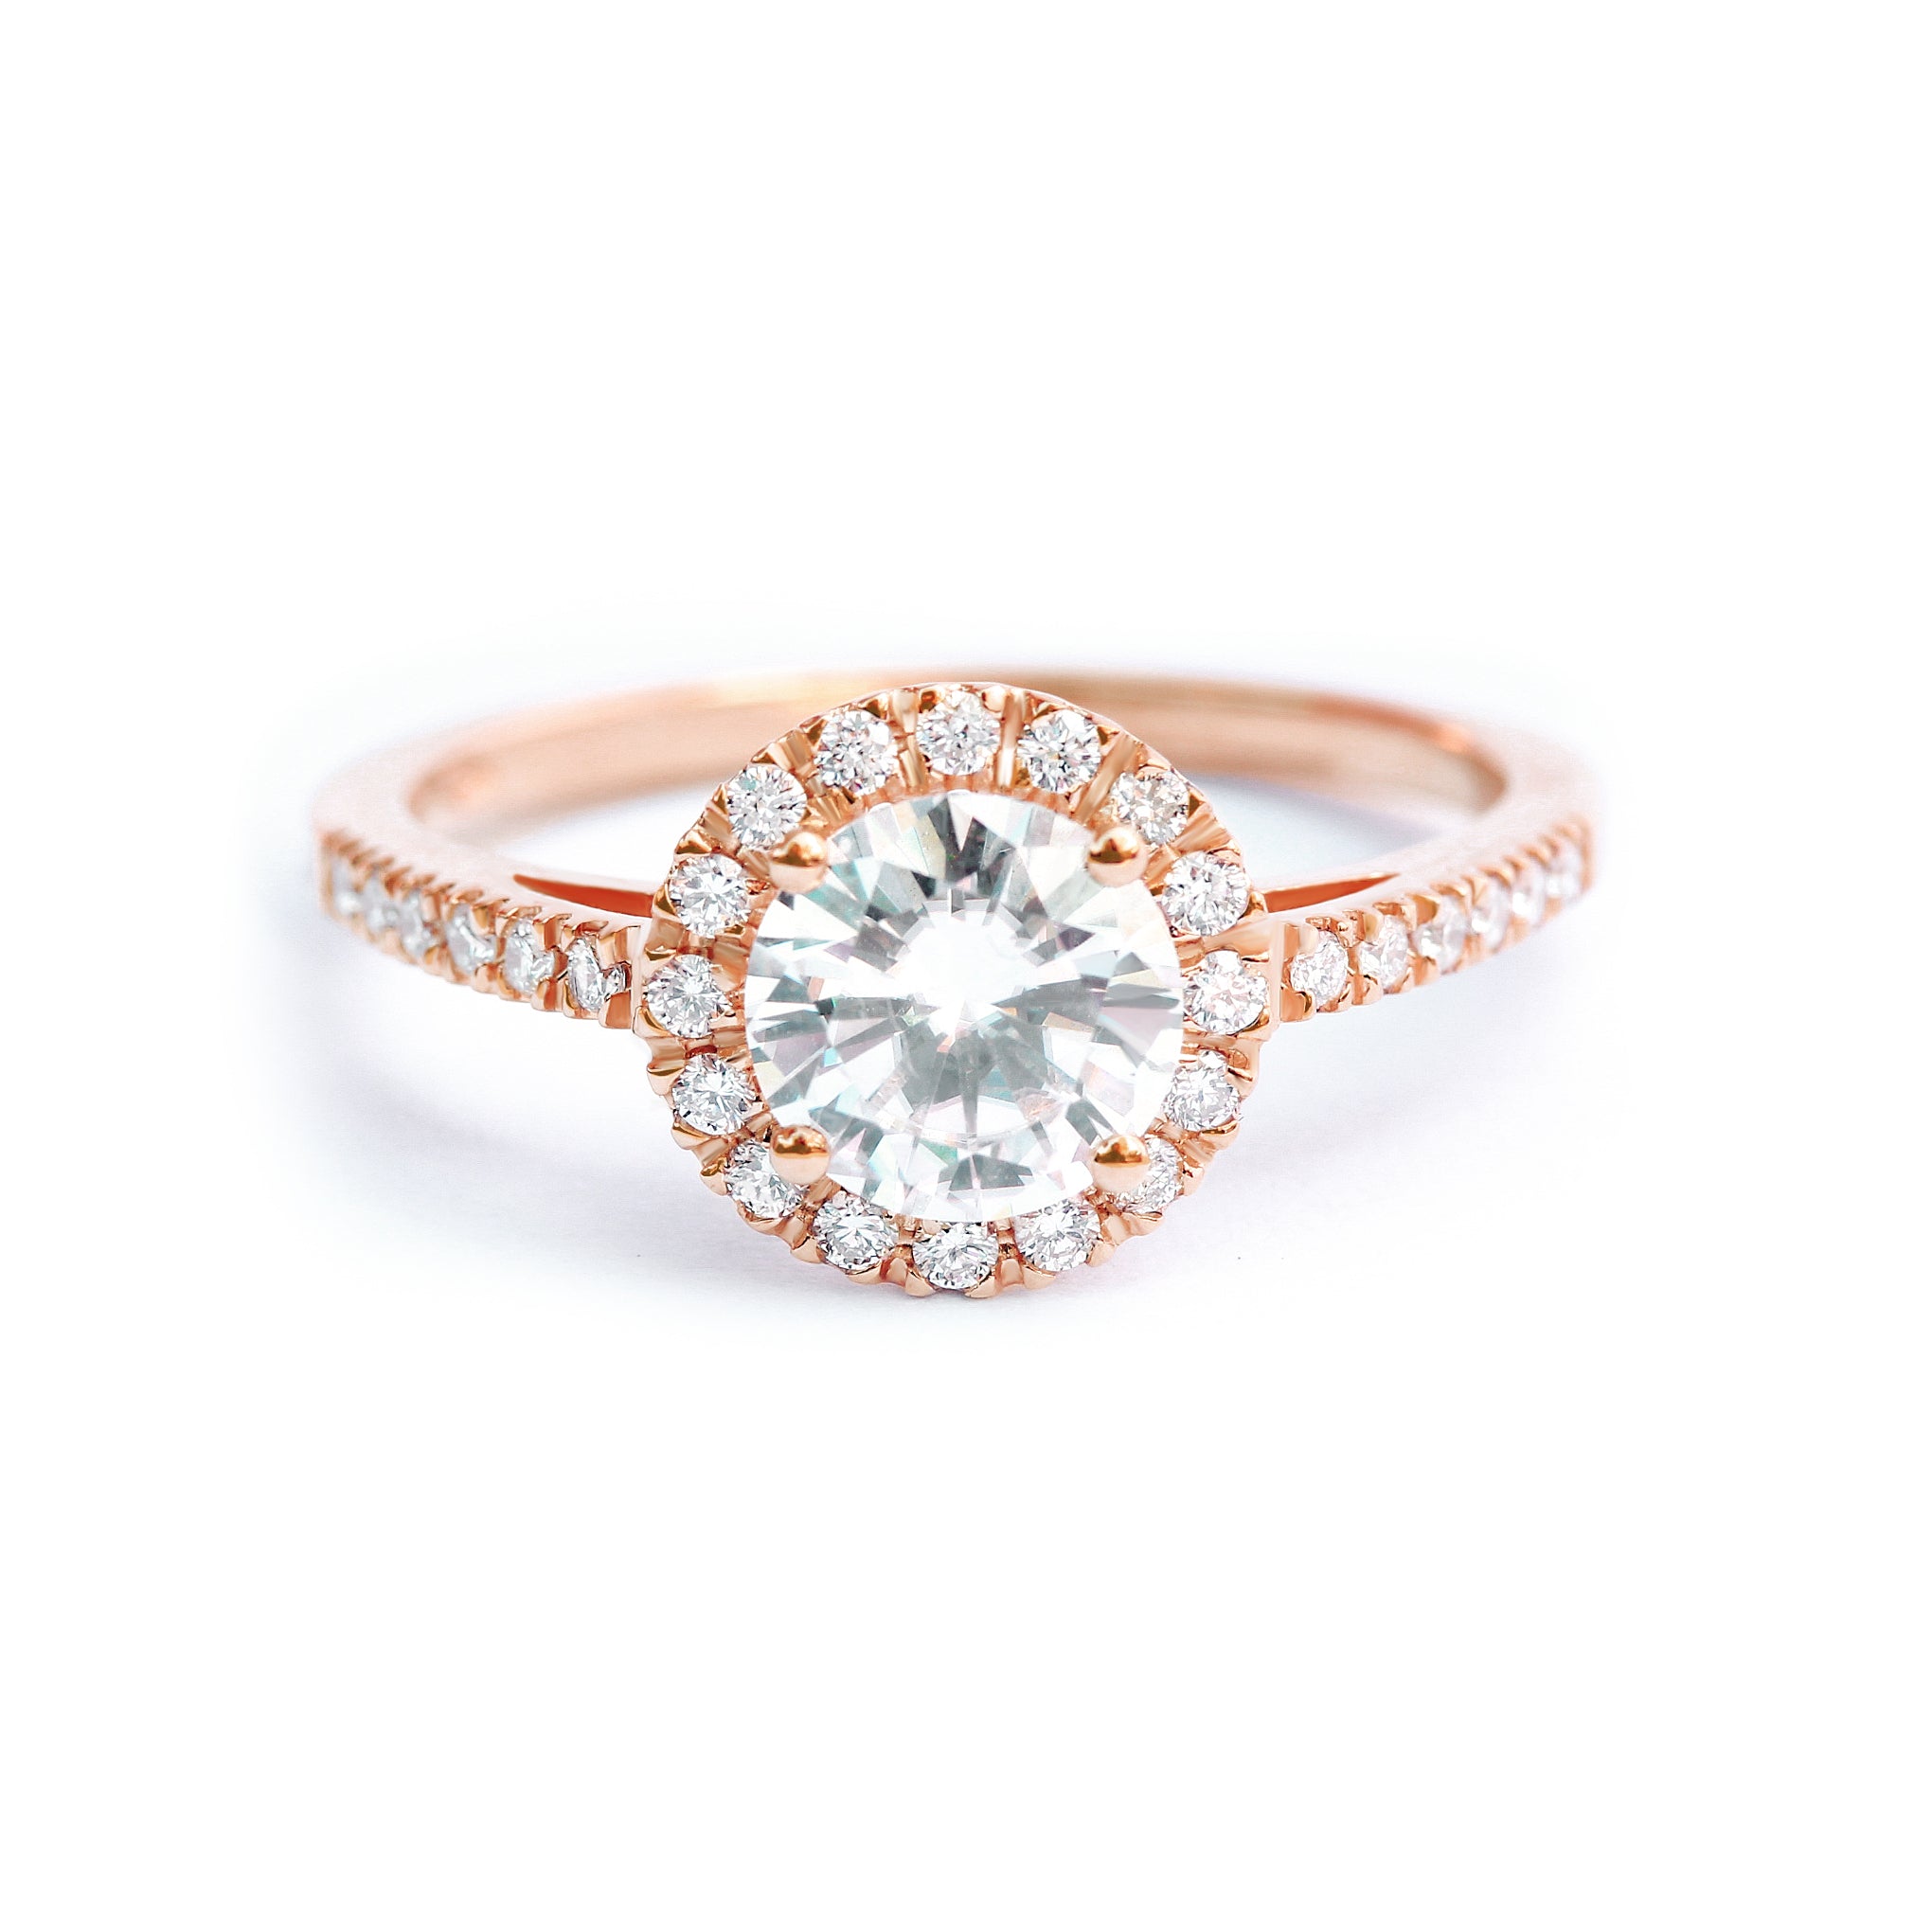 Classic & delicate Round diamond halo engagement ring - "Lady" ♥